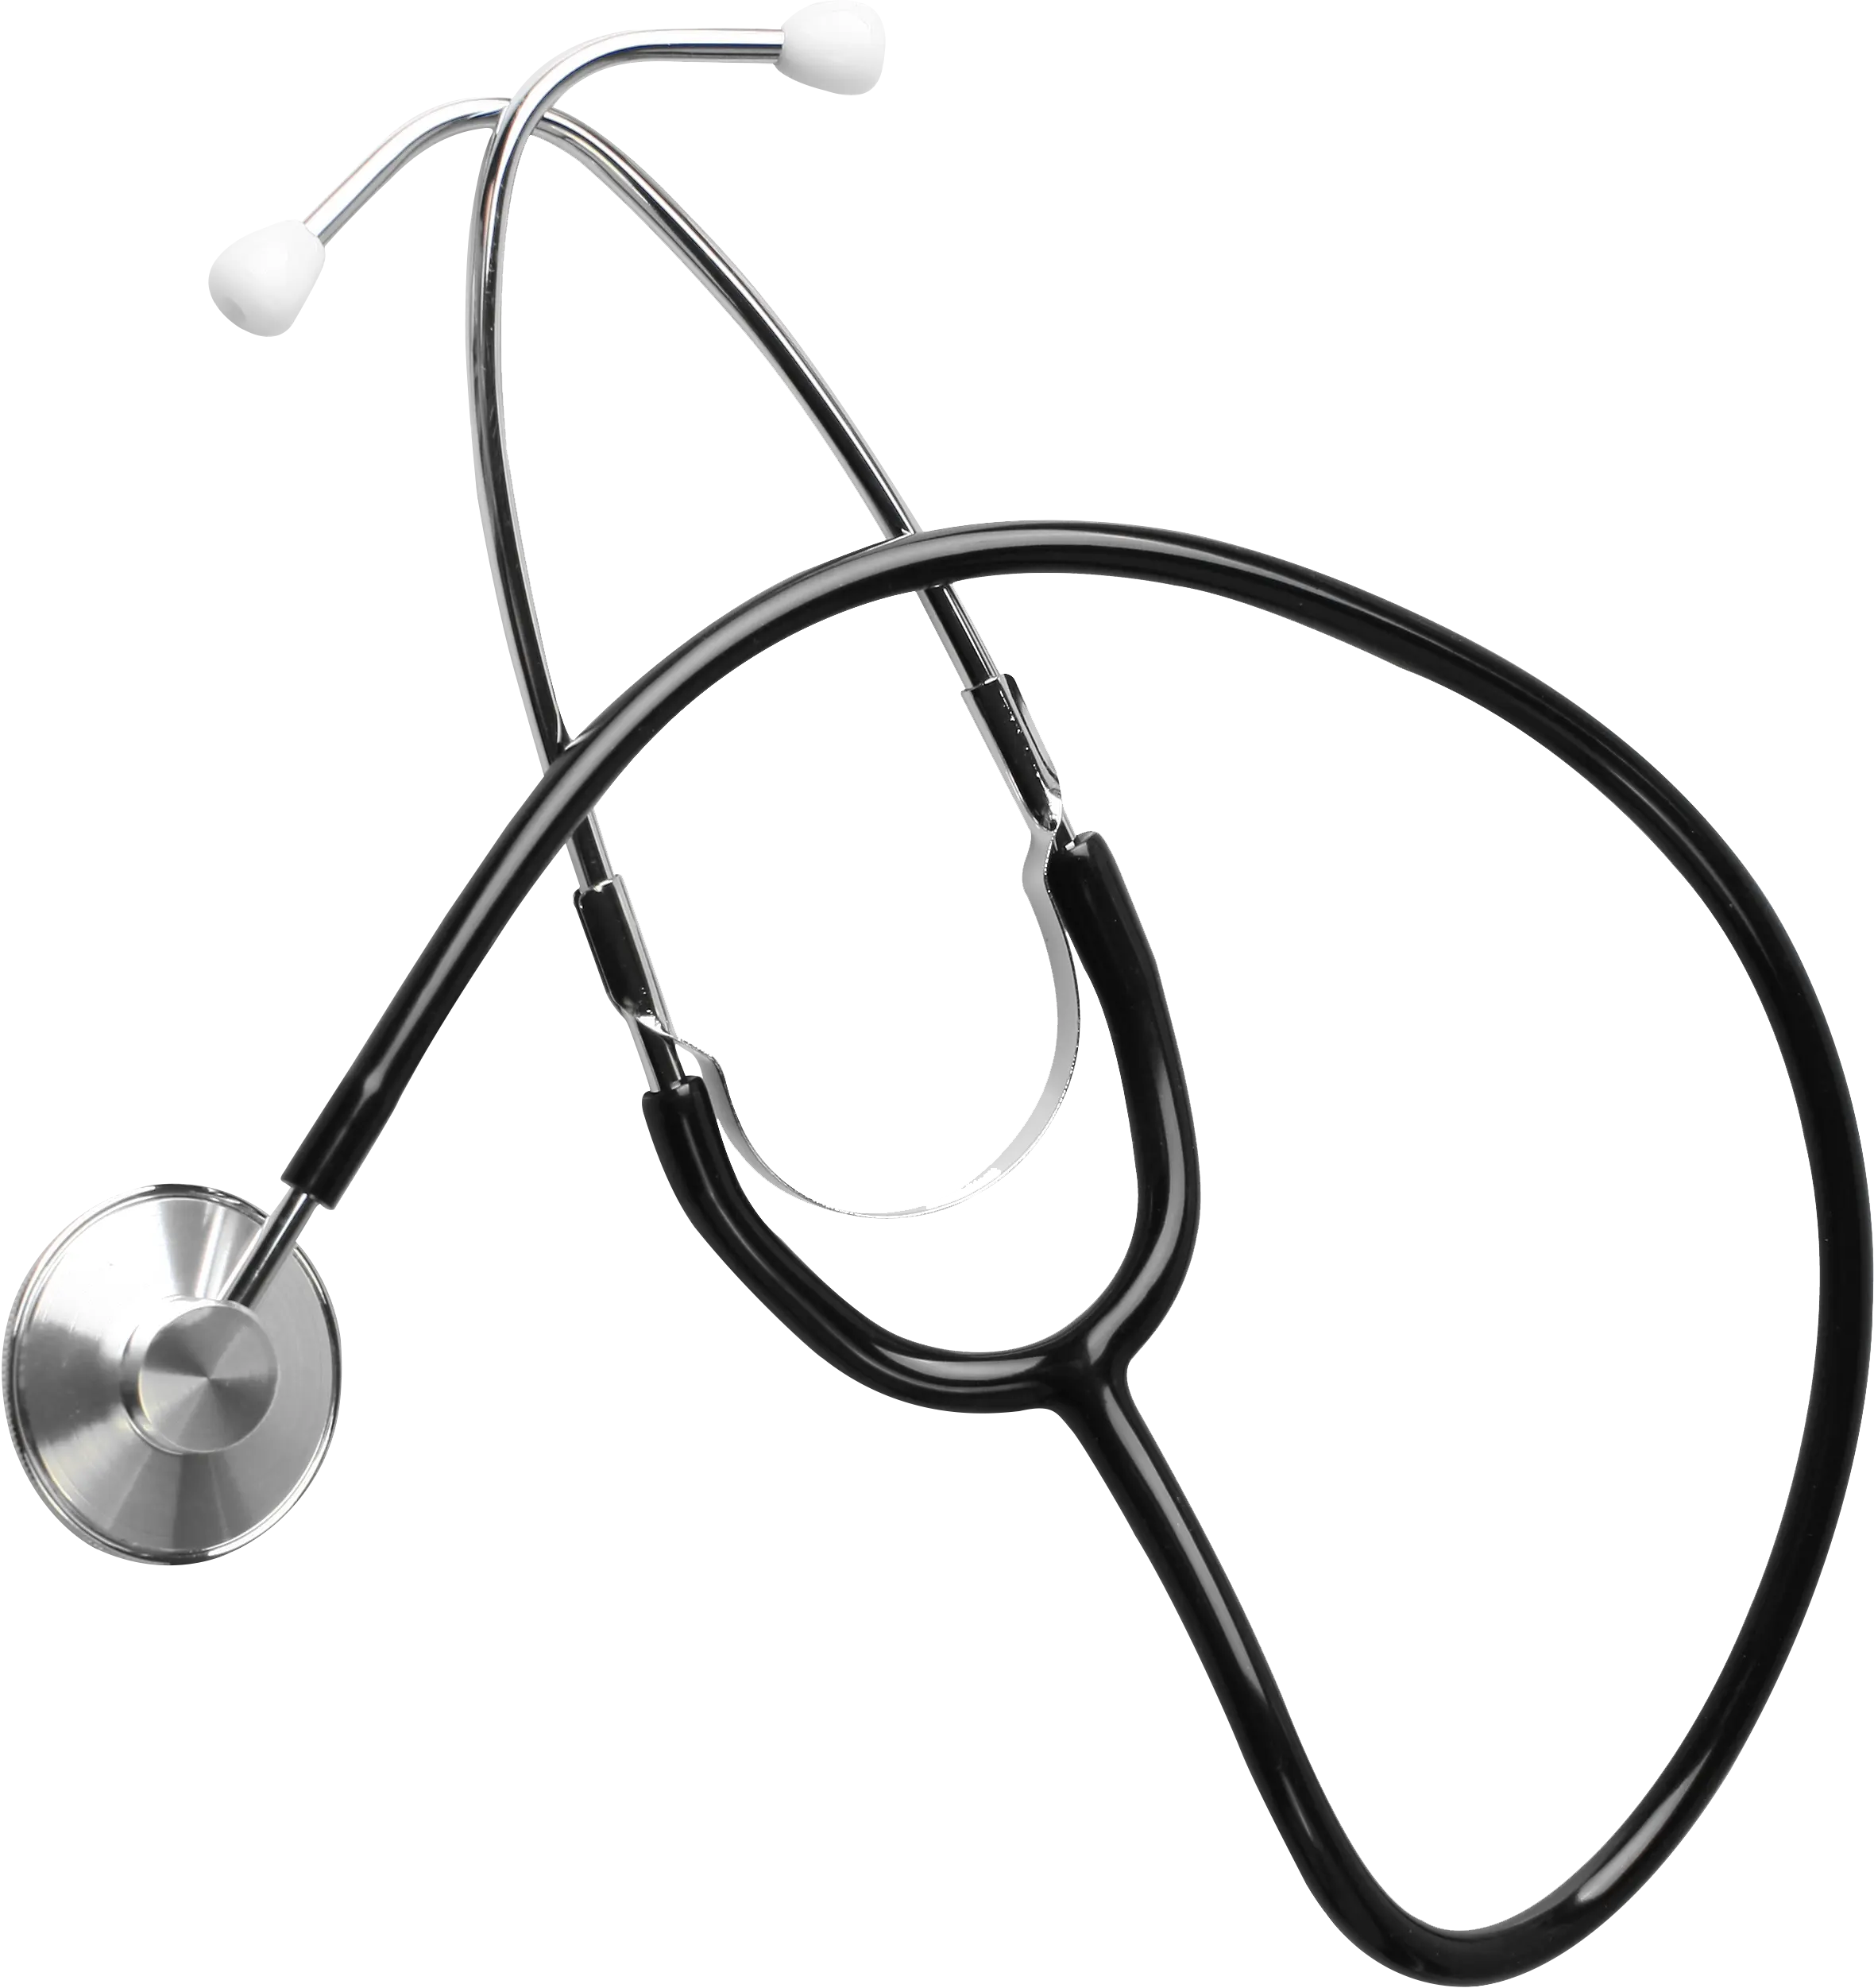 Honsun HS-30A Professional Hospital Doctor Medical Single Head Stethoscope For Adult & Child